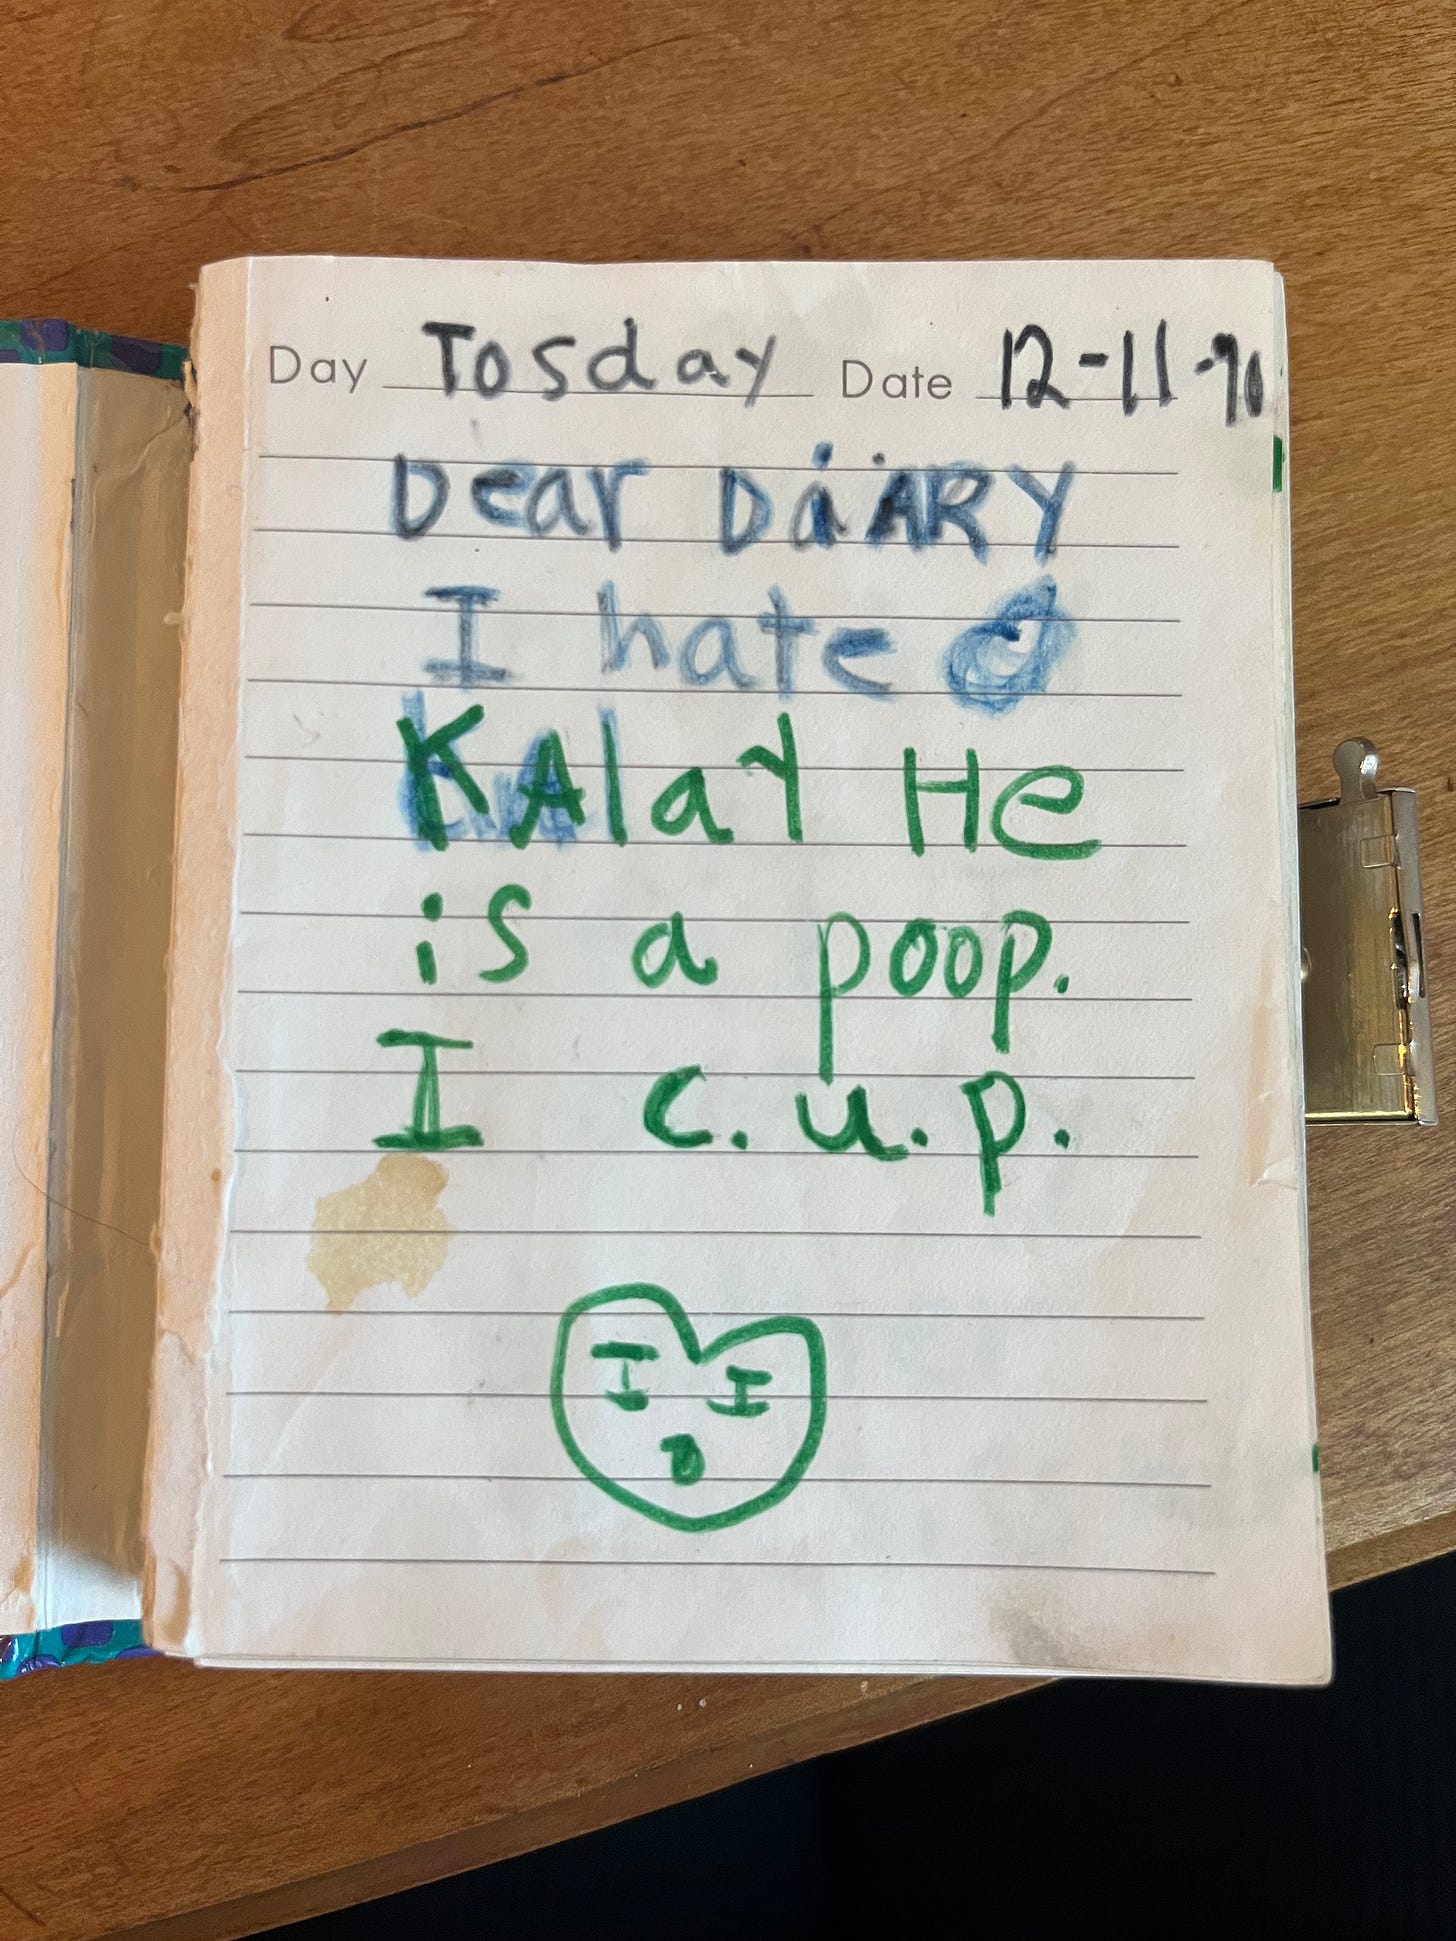 Interior page of Amber's childhood diary. Text reads: "Tosday 12-11-90 Dear Diary, I hate Kalay He is a poop. I c.u.p."